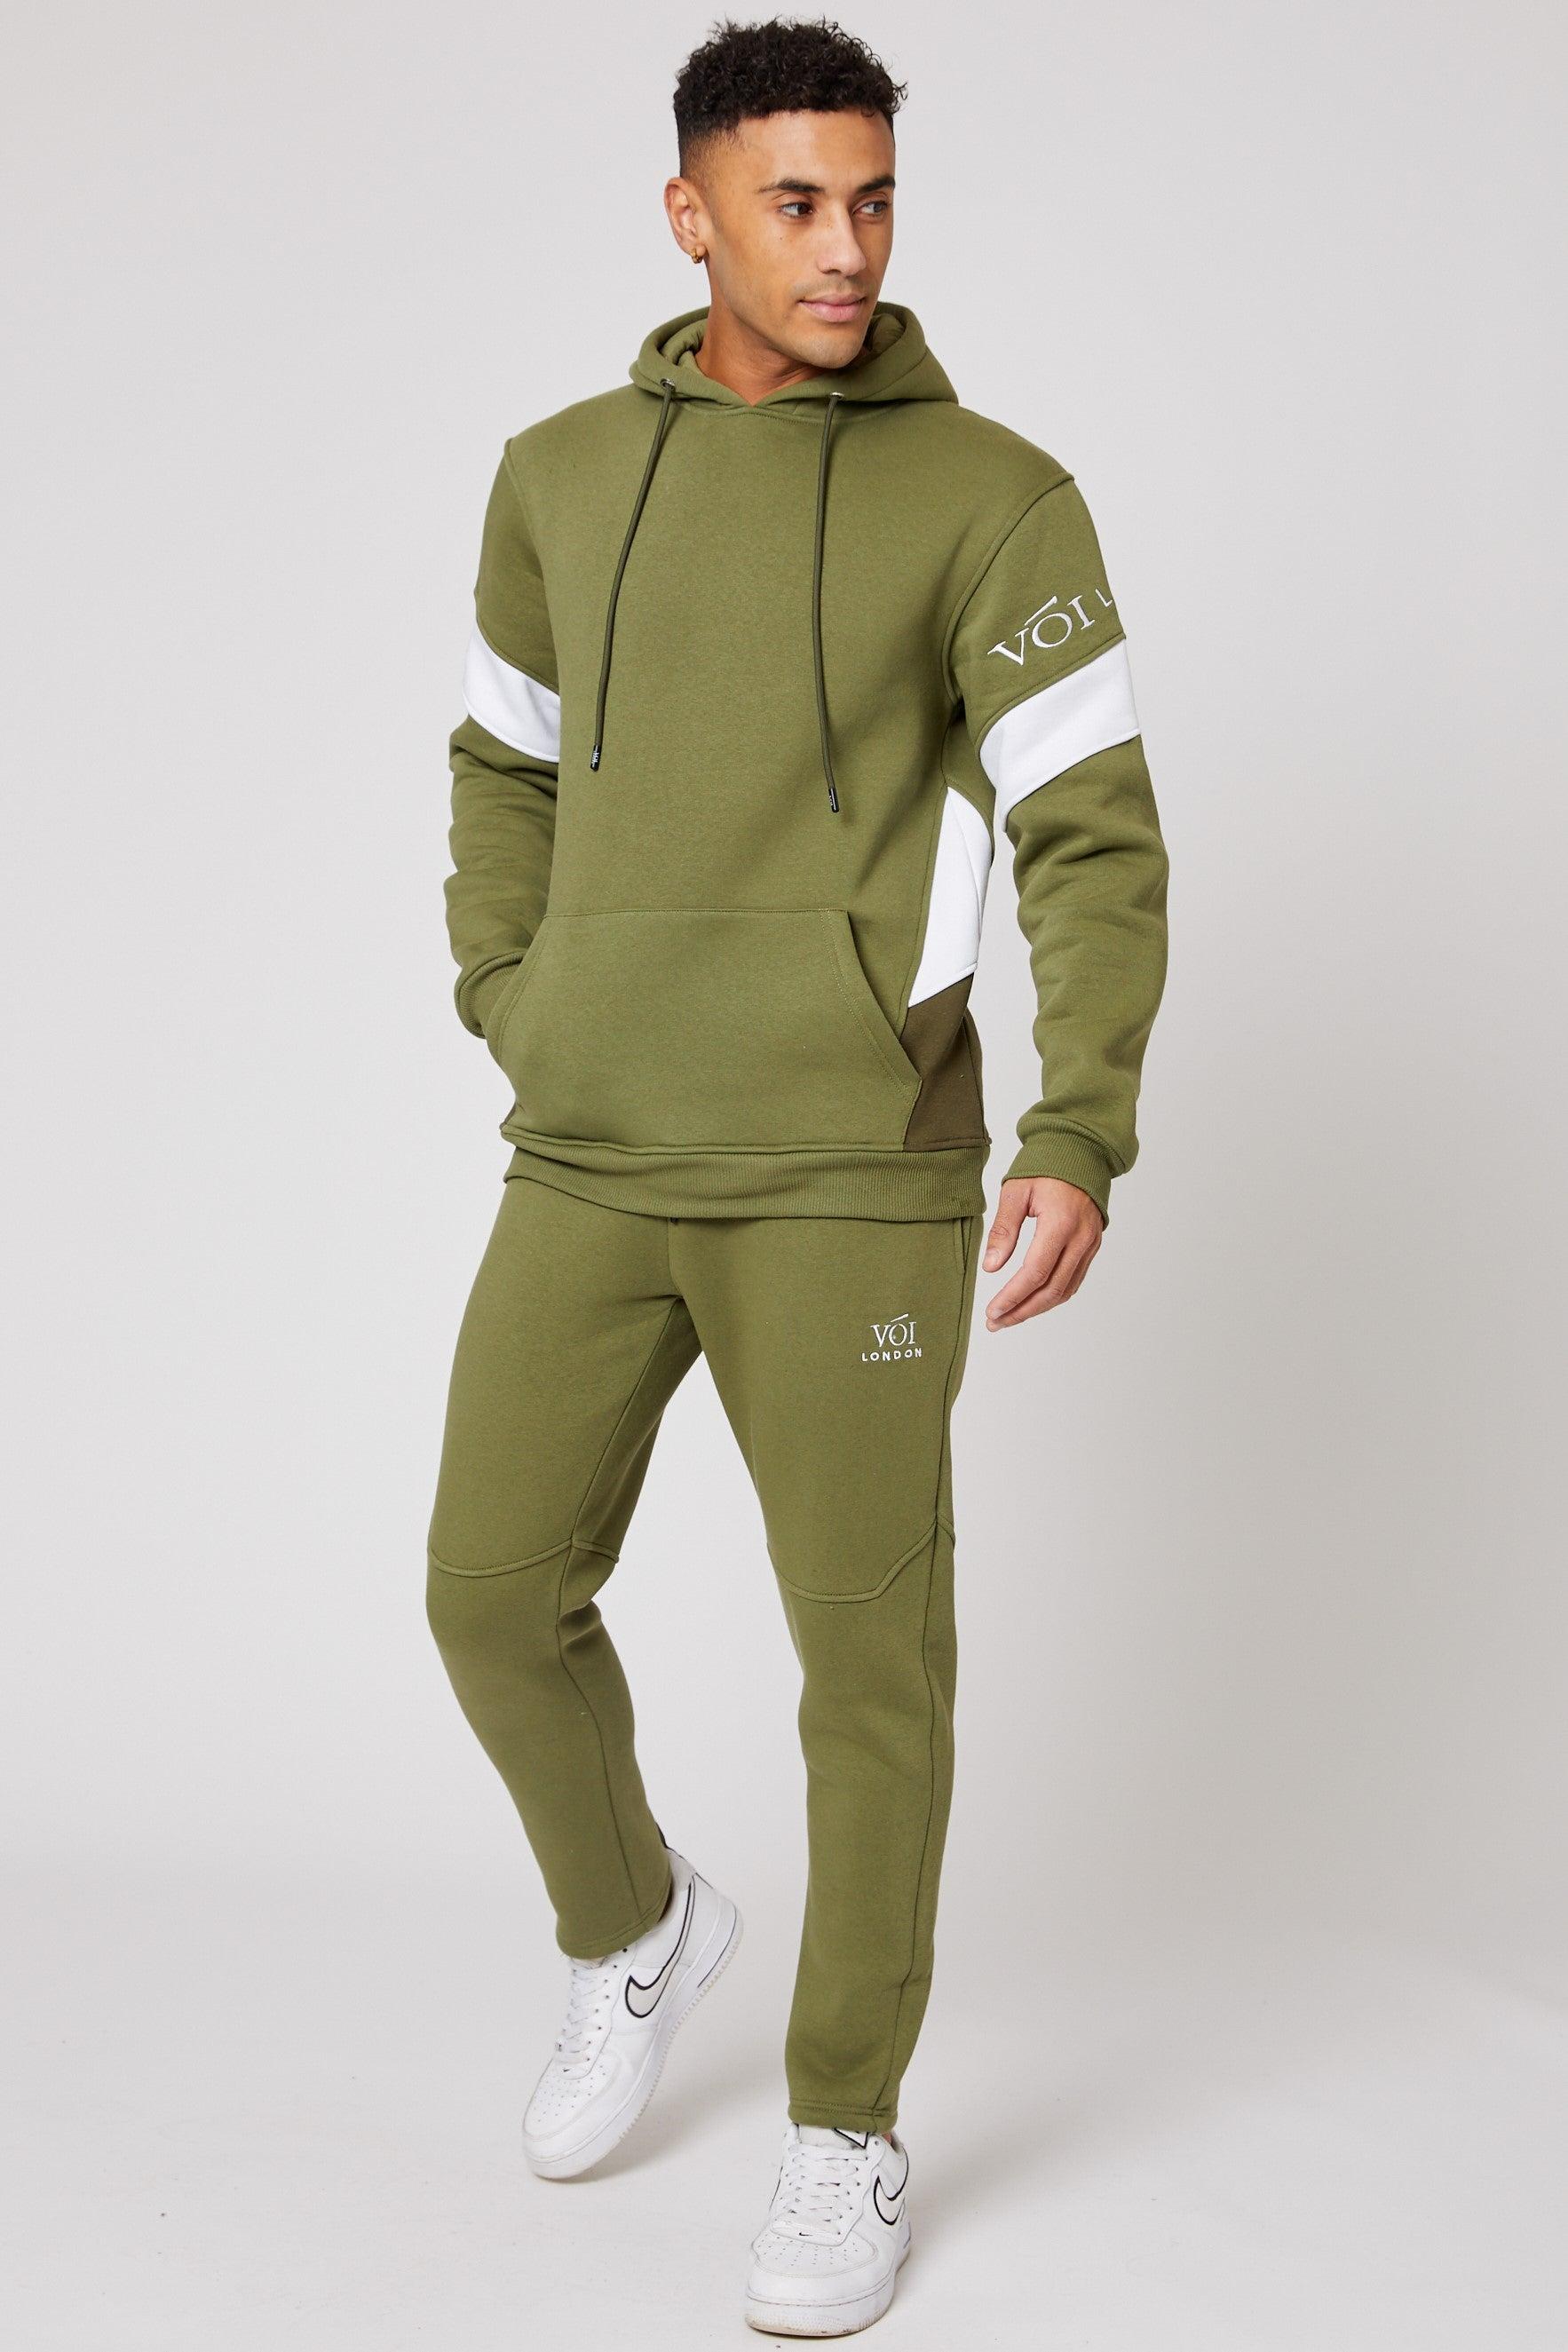 Mens Clothing Activewear Voi London Fleece Canary Wharf Tracksuit for Men gym and workout clothes Tracksuits and sweat suits 